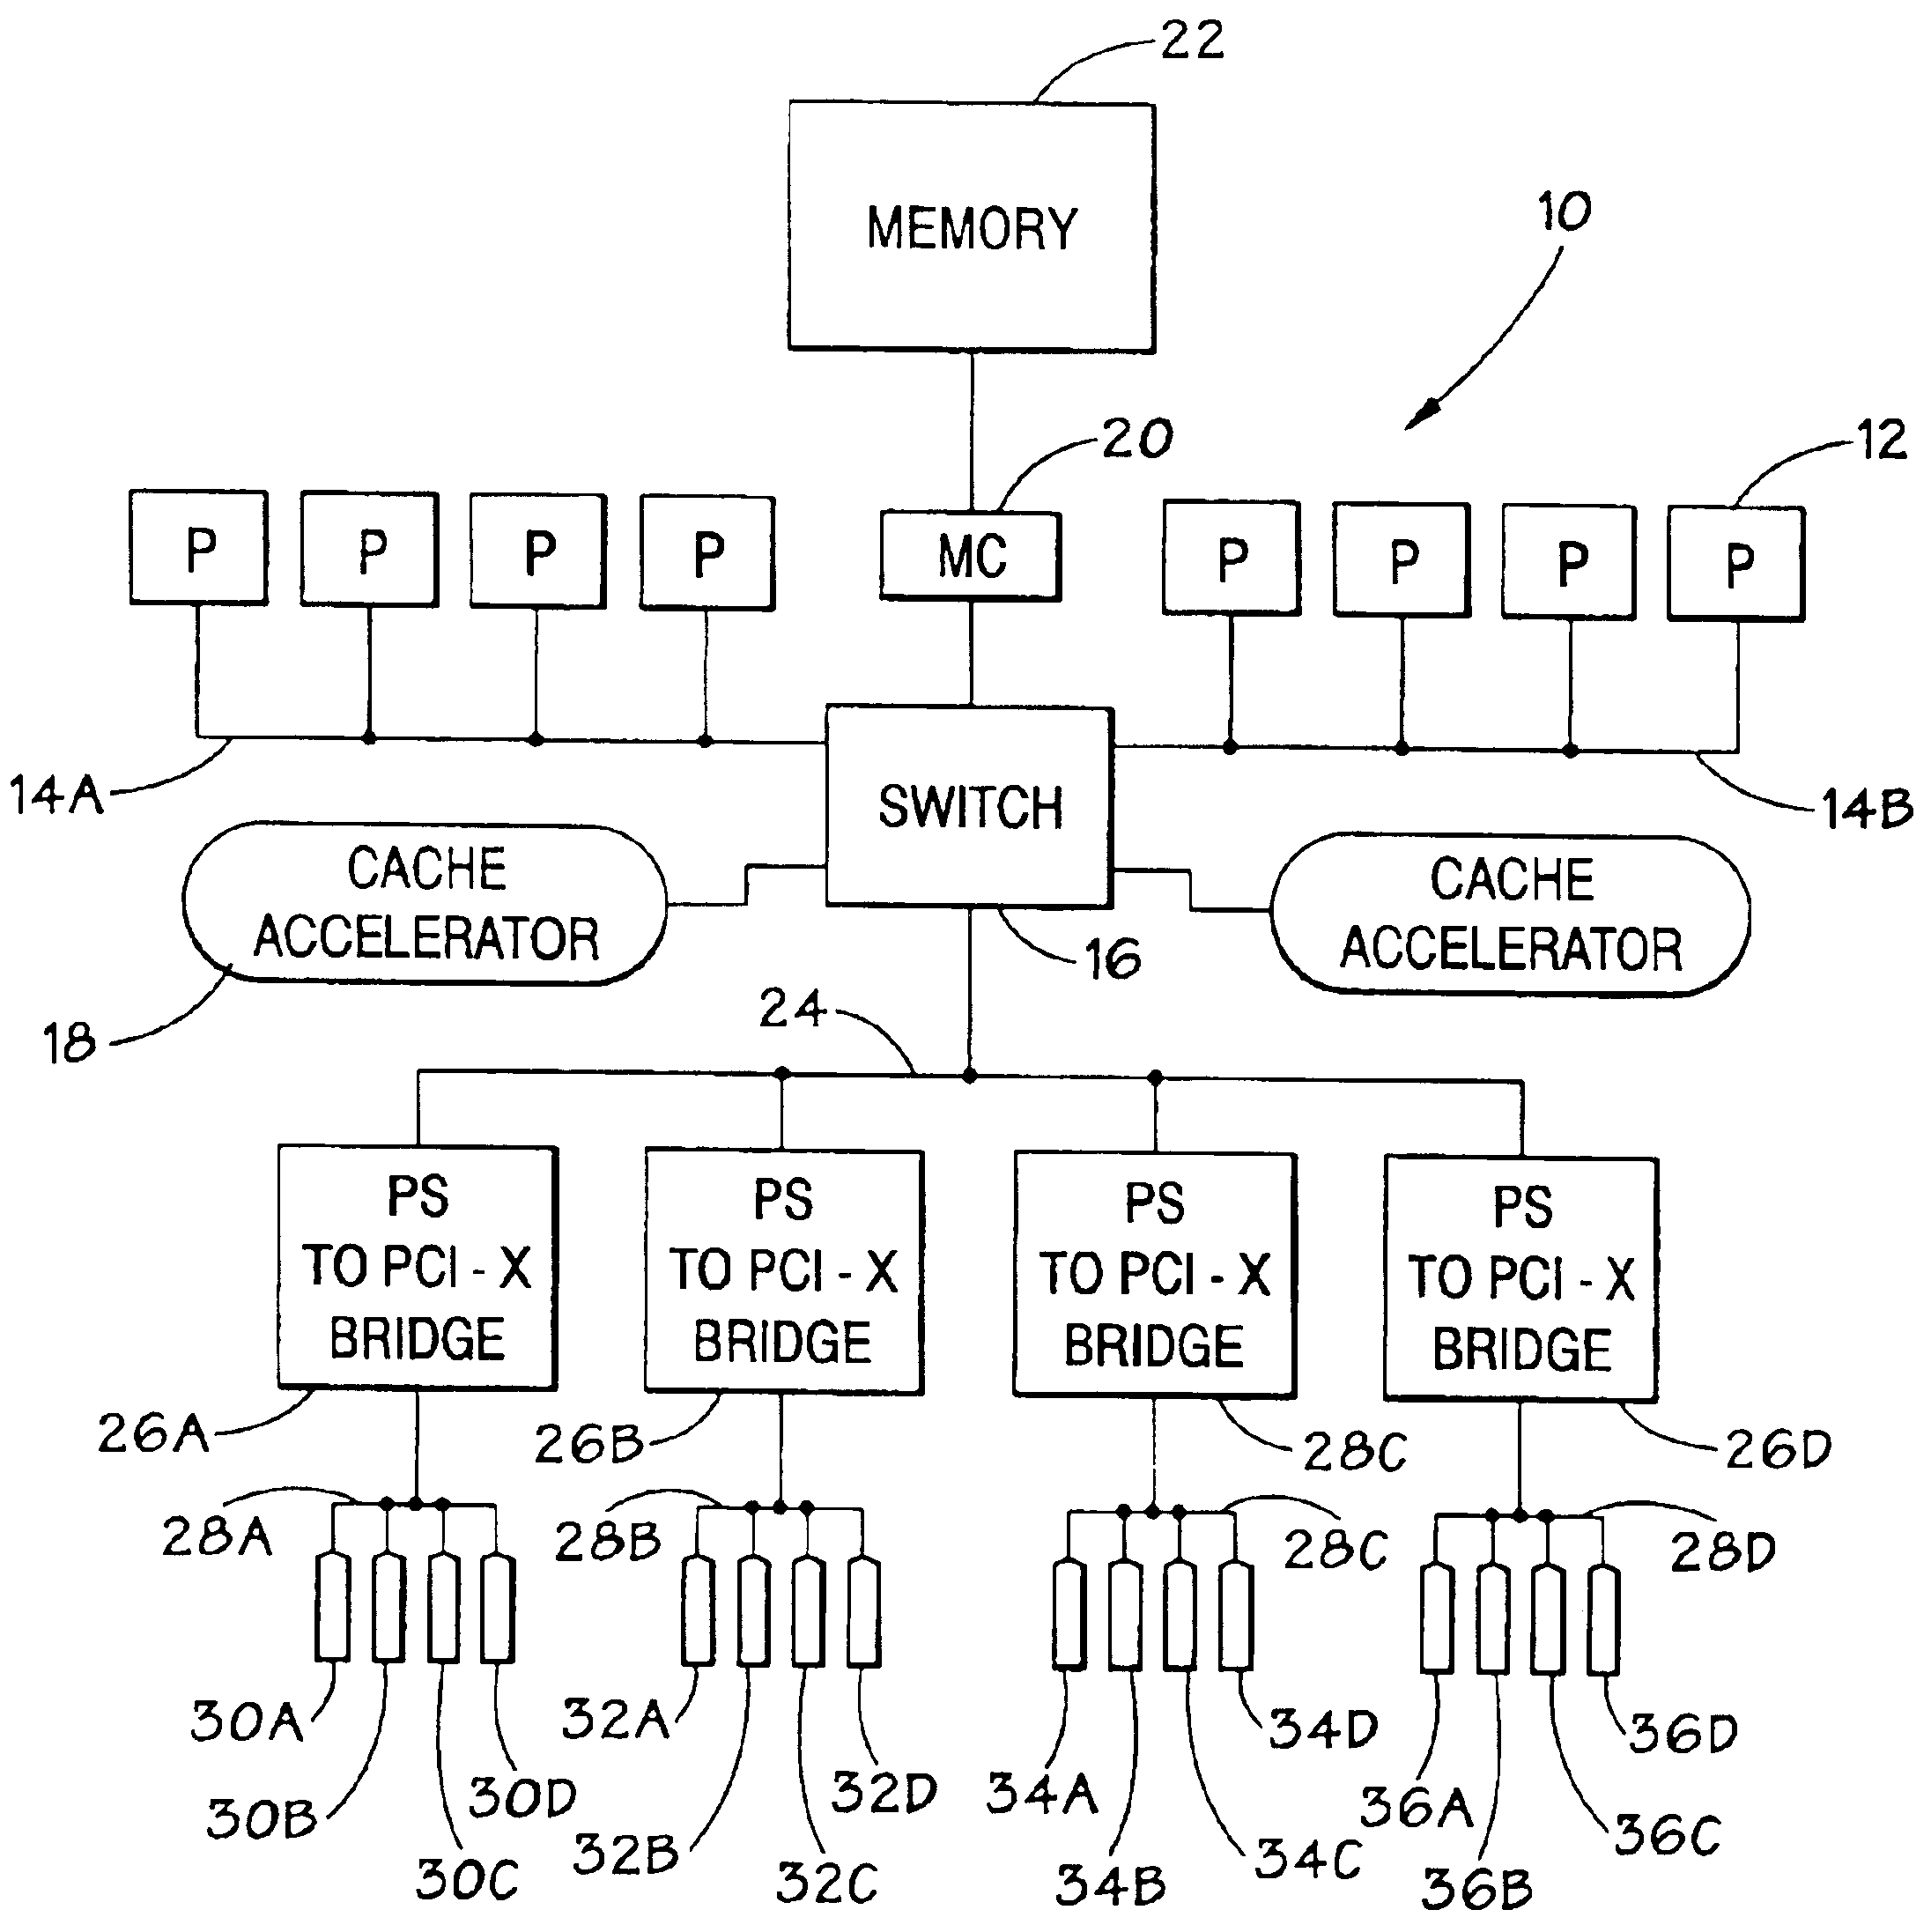 Enhancing a PCI-X split completion transaction by aligning cachelines with an allowable disconnect boundary's ending address